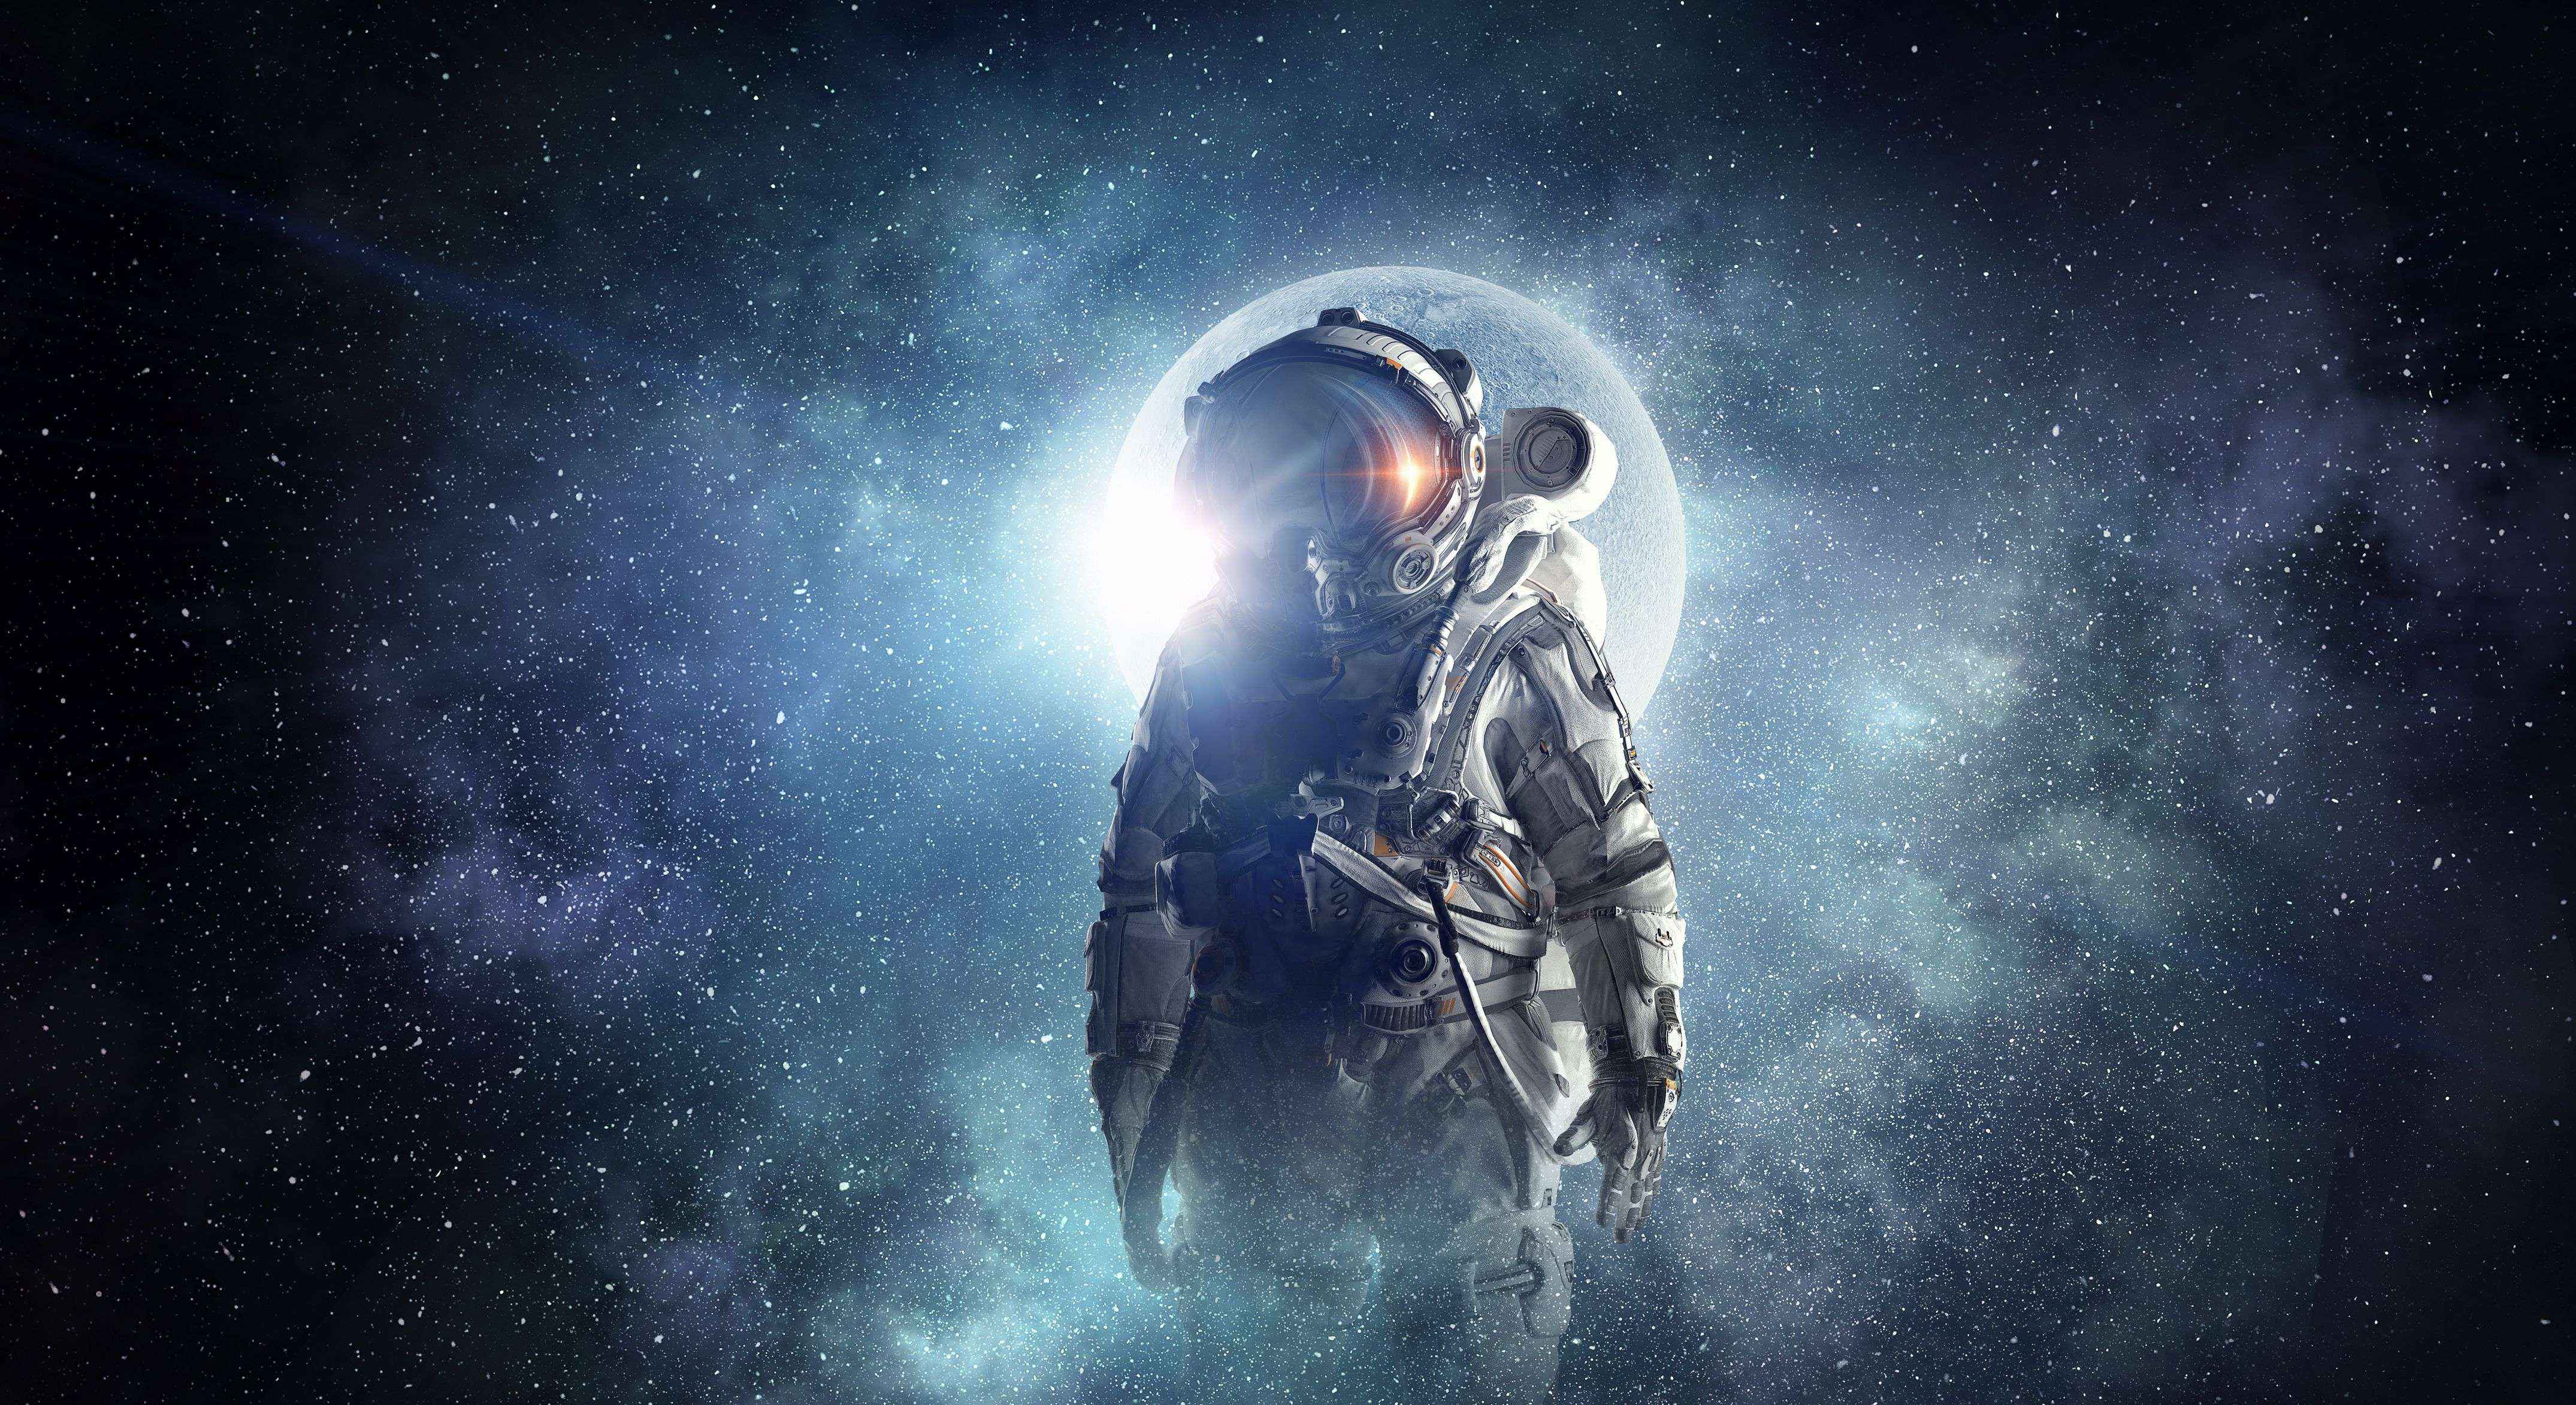 Astronaut In Outer Space Wallpapers - Wallpaper Cave